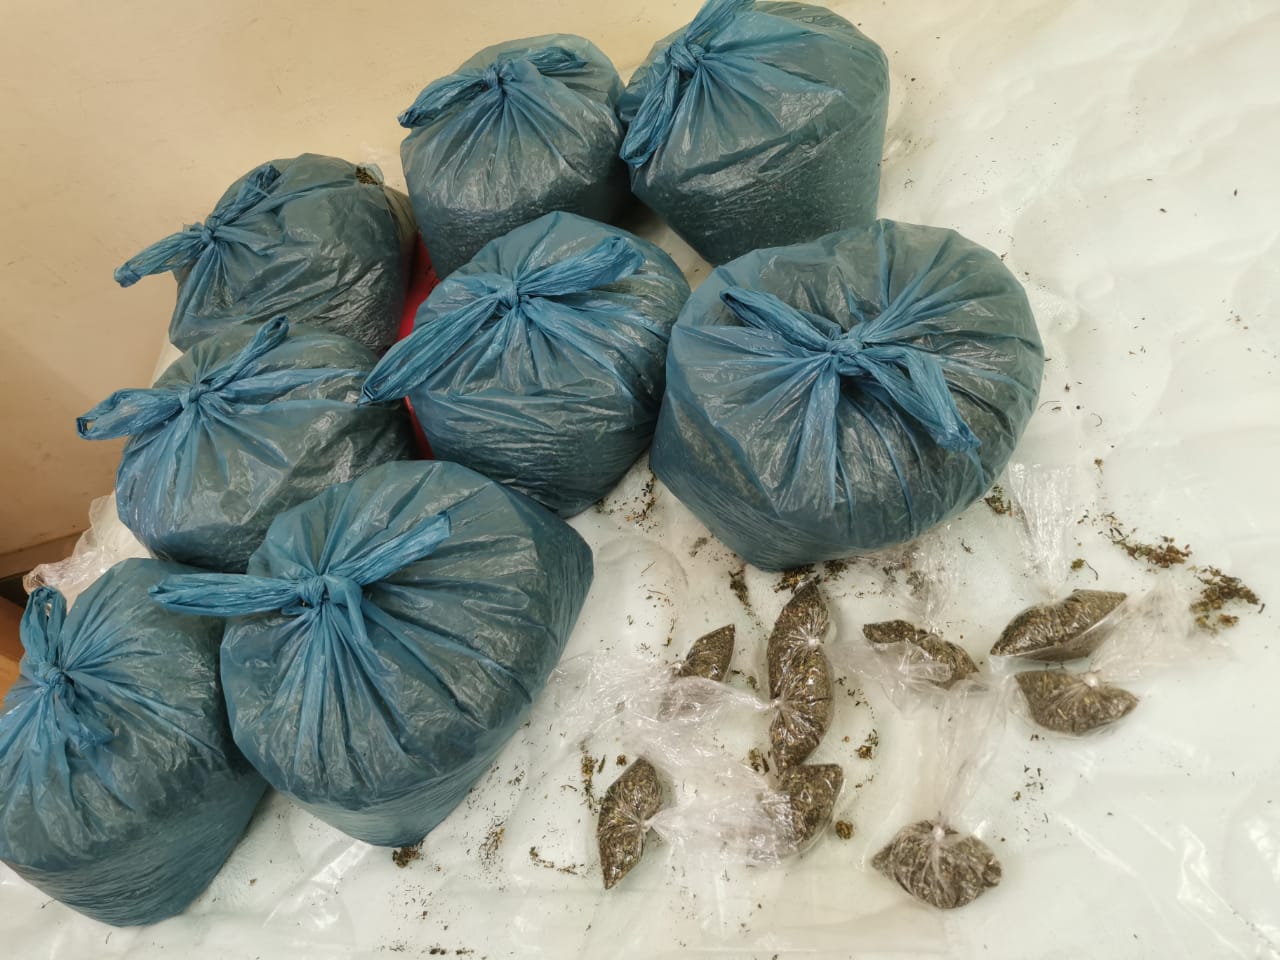 Woman arrested with dagga and other drugs in Butterworth